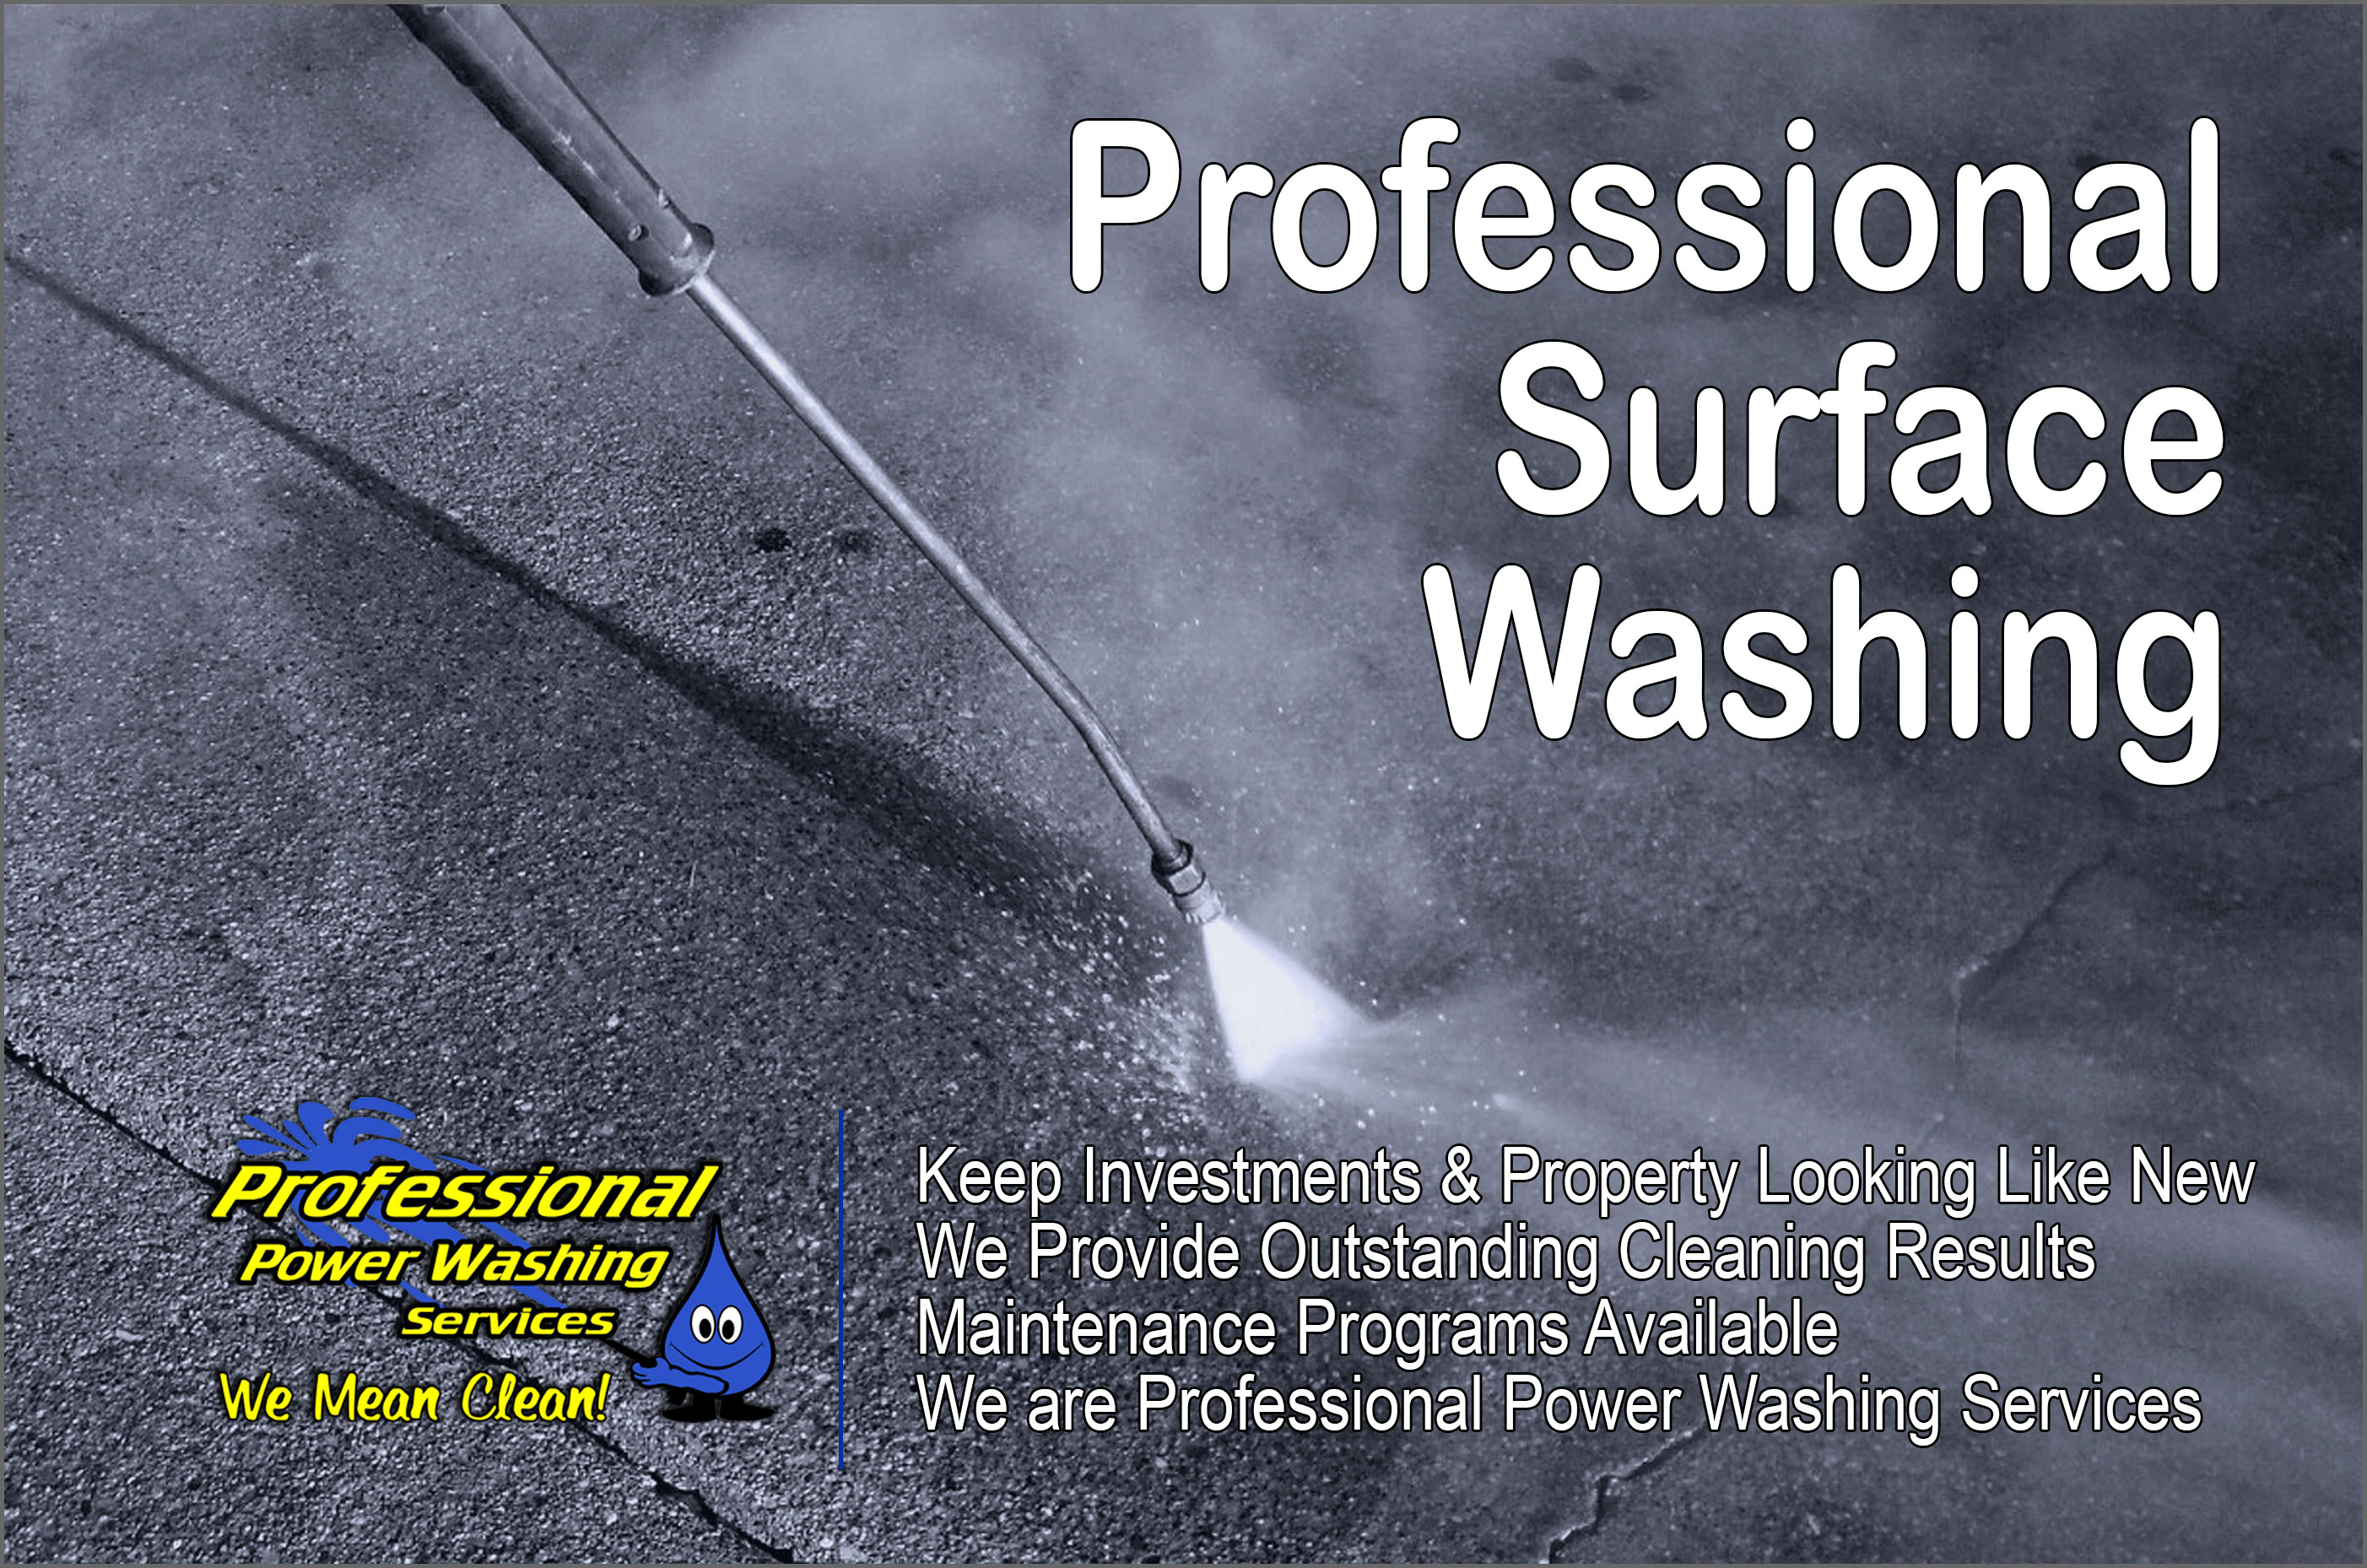 Professional Washing and Cleaning